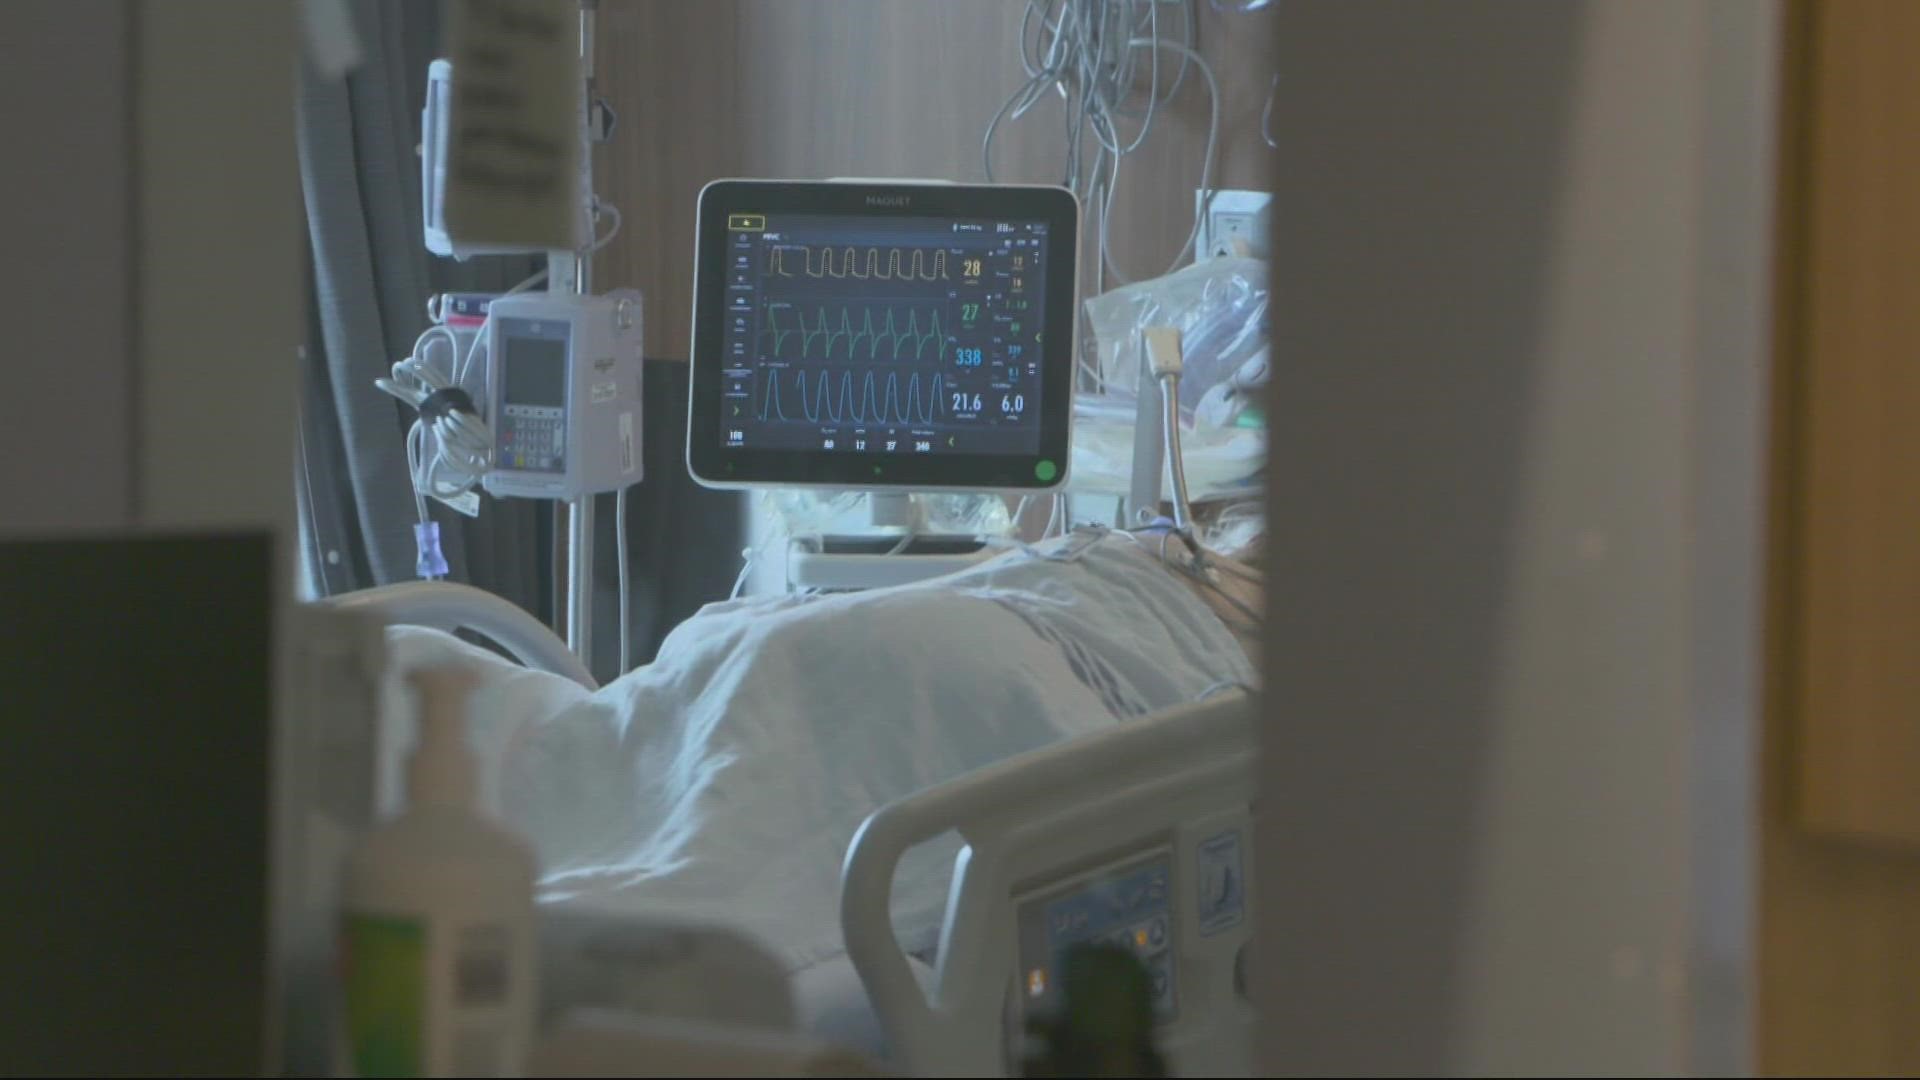 The number of open beds in Oregon hospitals continues to shrink due to COVID patients. As Pat Dooris explains, some people are not getting surgeries they need.